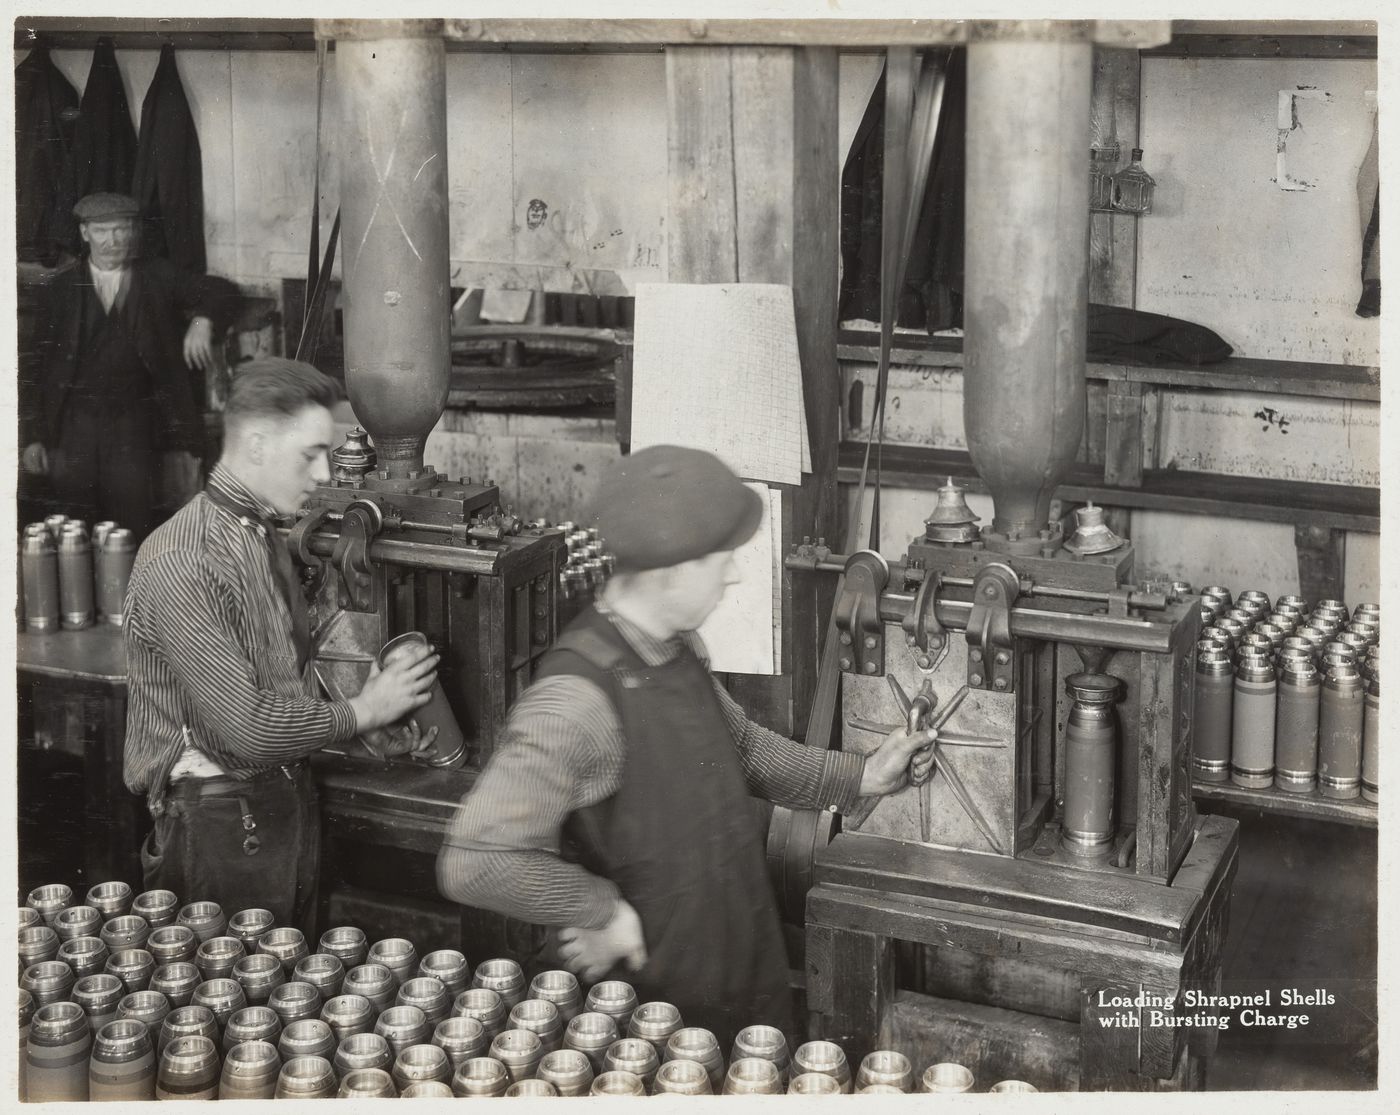 Interior view of workers loading shrapnel shells with bursting charge at the Energite Explosives Plant No. 3, the Shell Loading Plant, Renfrew, Ontario, Canada